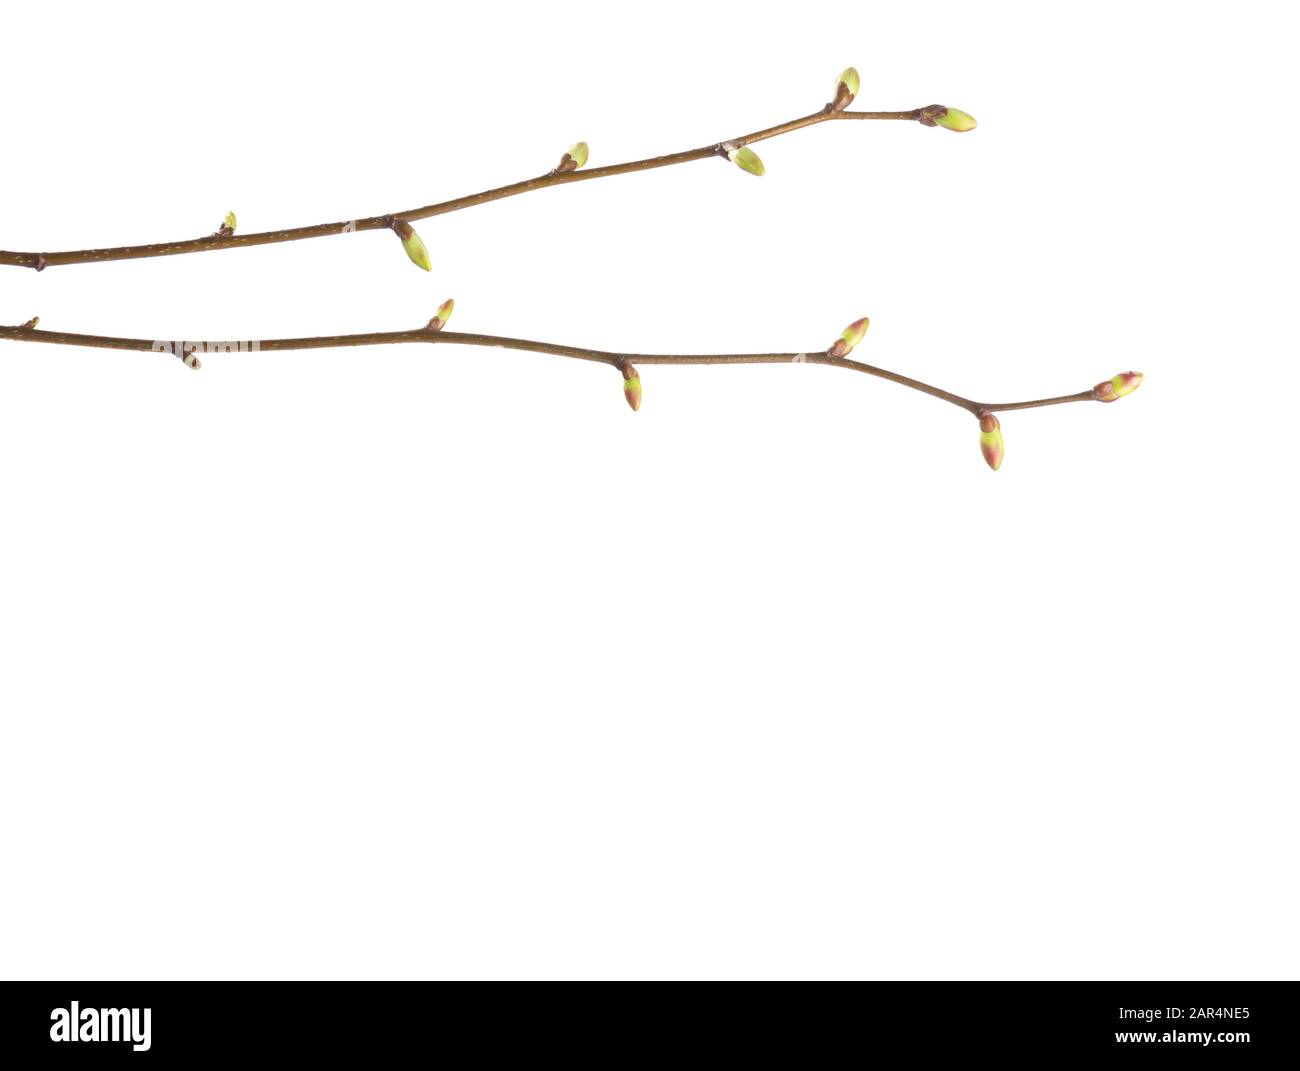 Close-up of  two  Linden branches  with young buds isolated on white background. Stock Photo